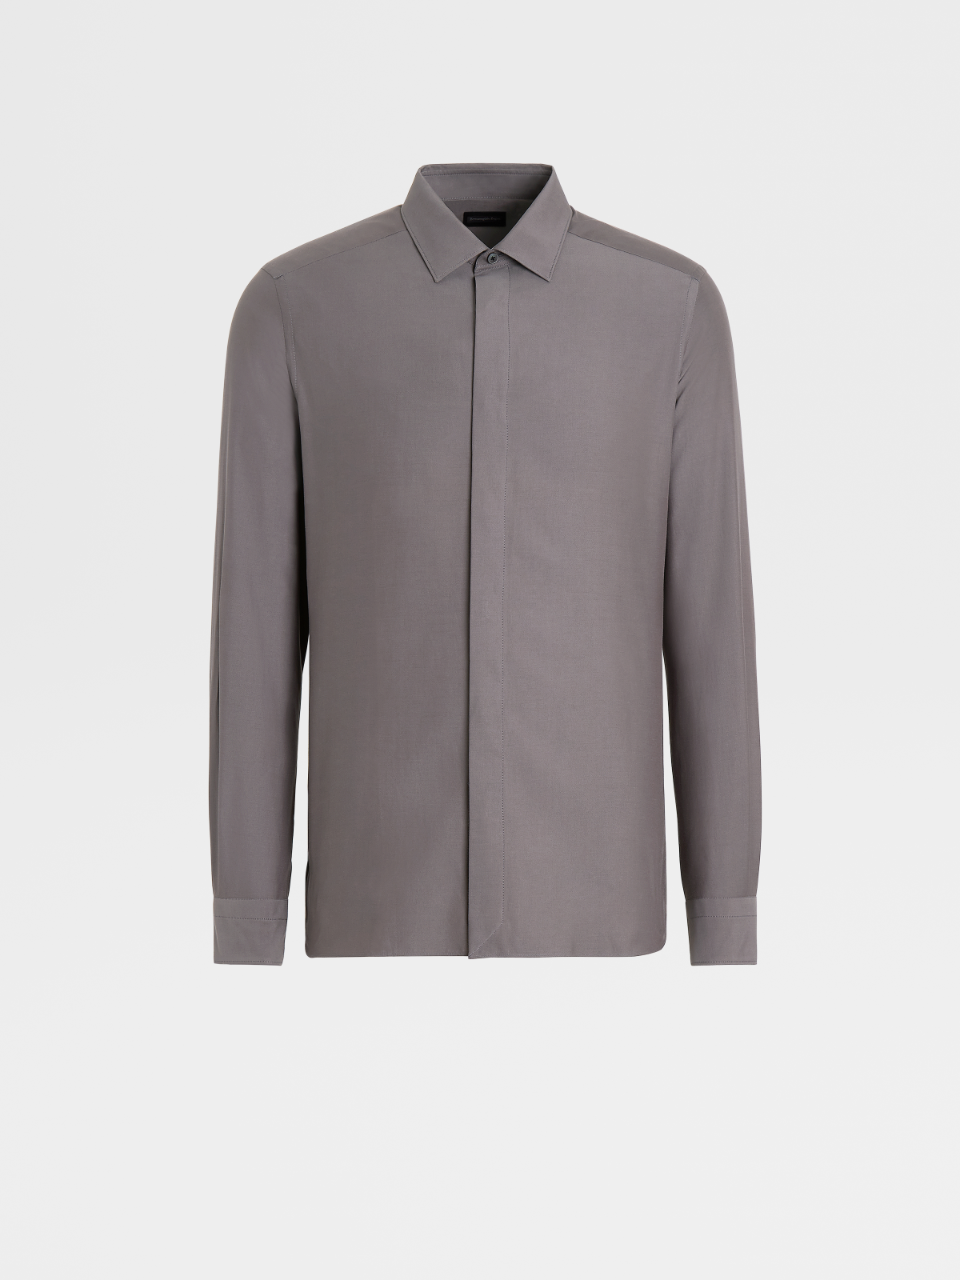 Grey Cotton and Silk Tailoring Shirt, City Slim Fit